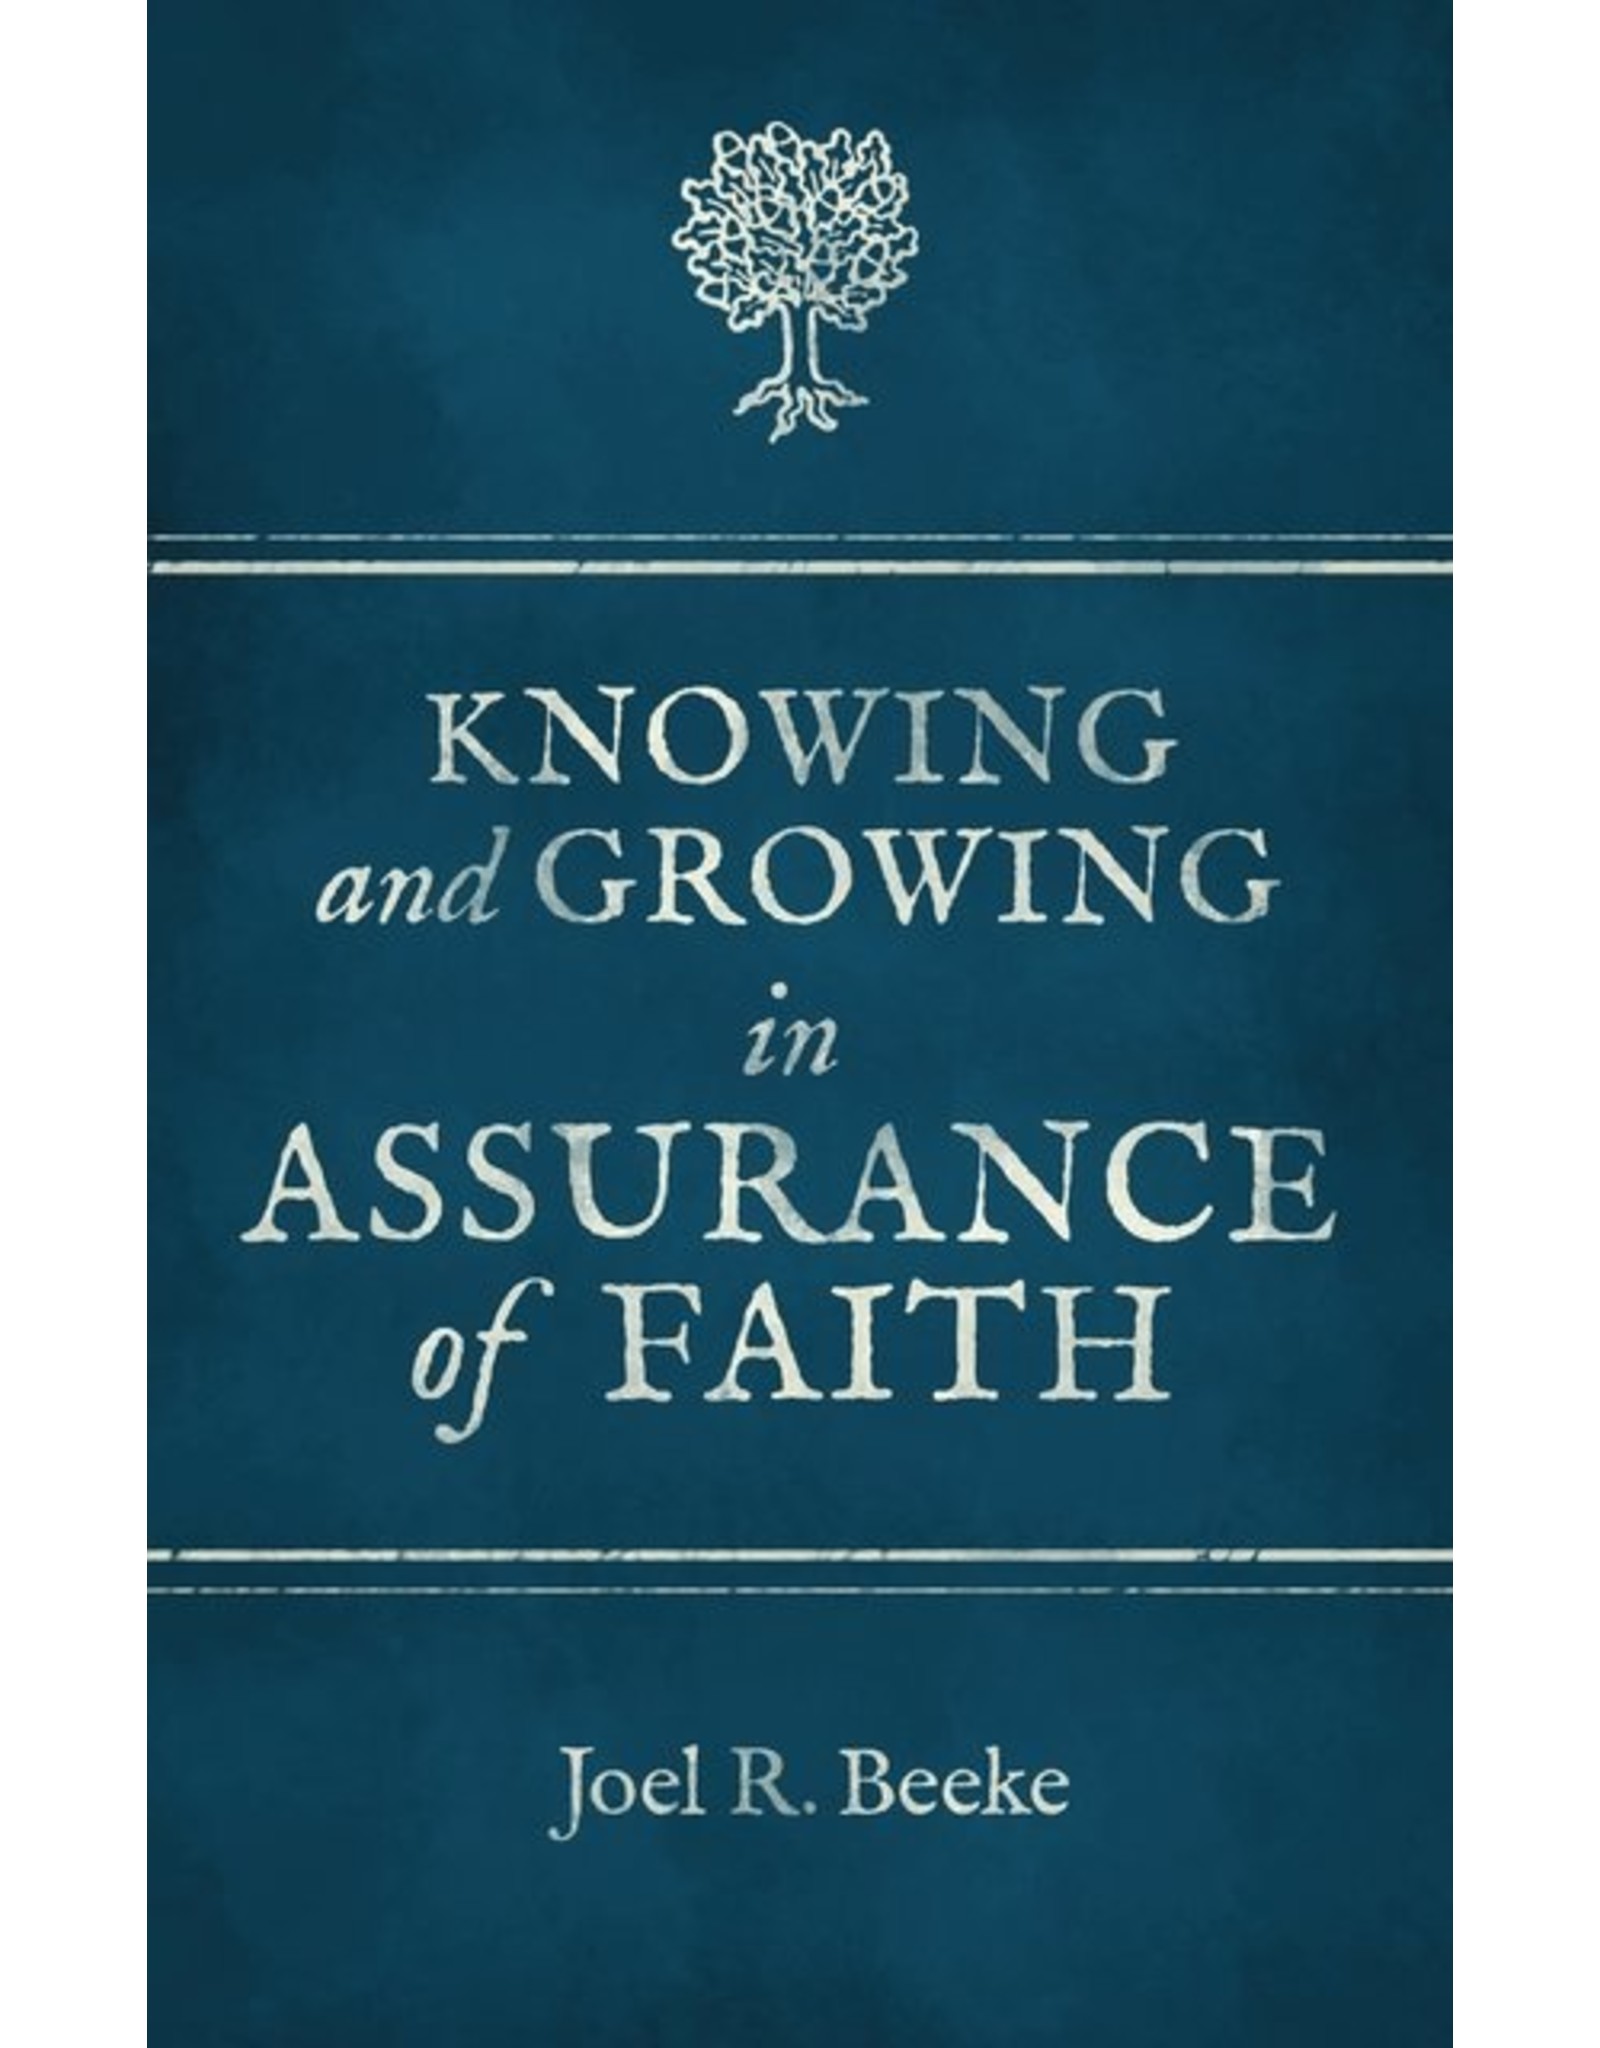 Joel R Beeke Knowing and Growing in Assurance of Faith